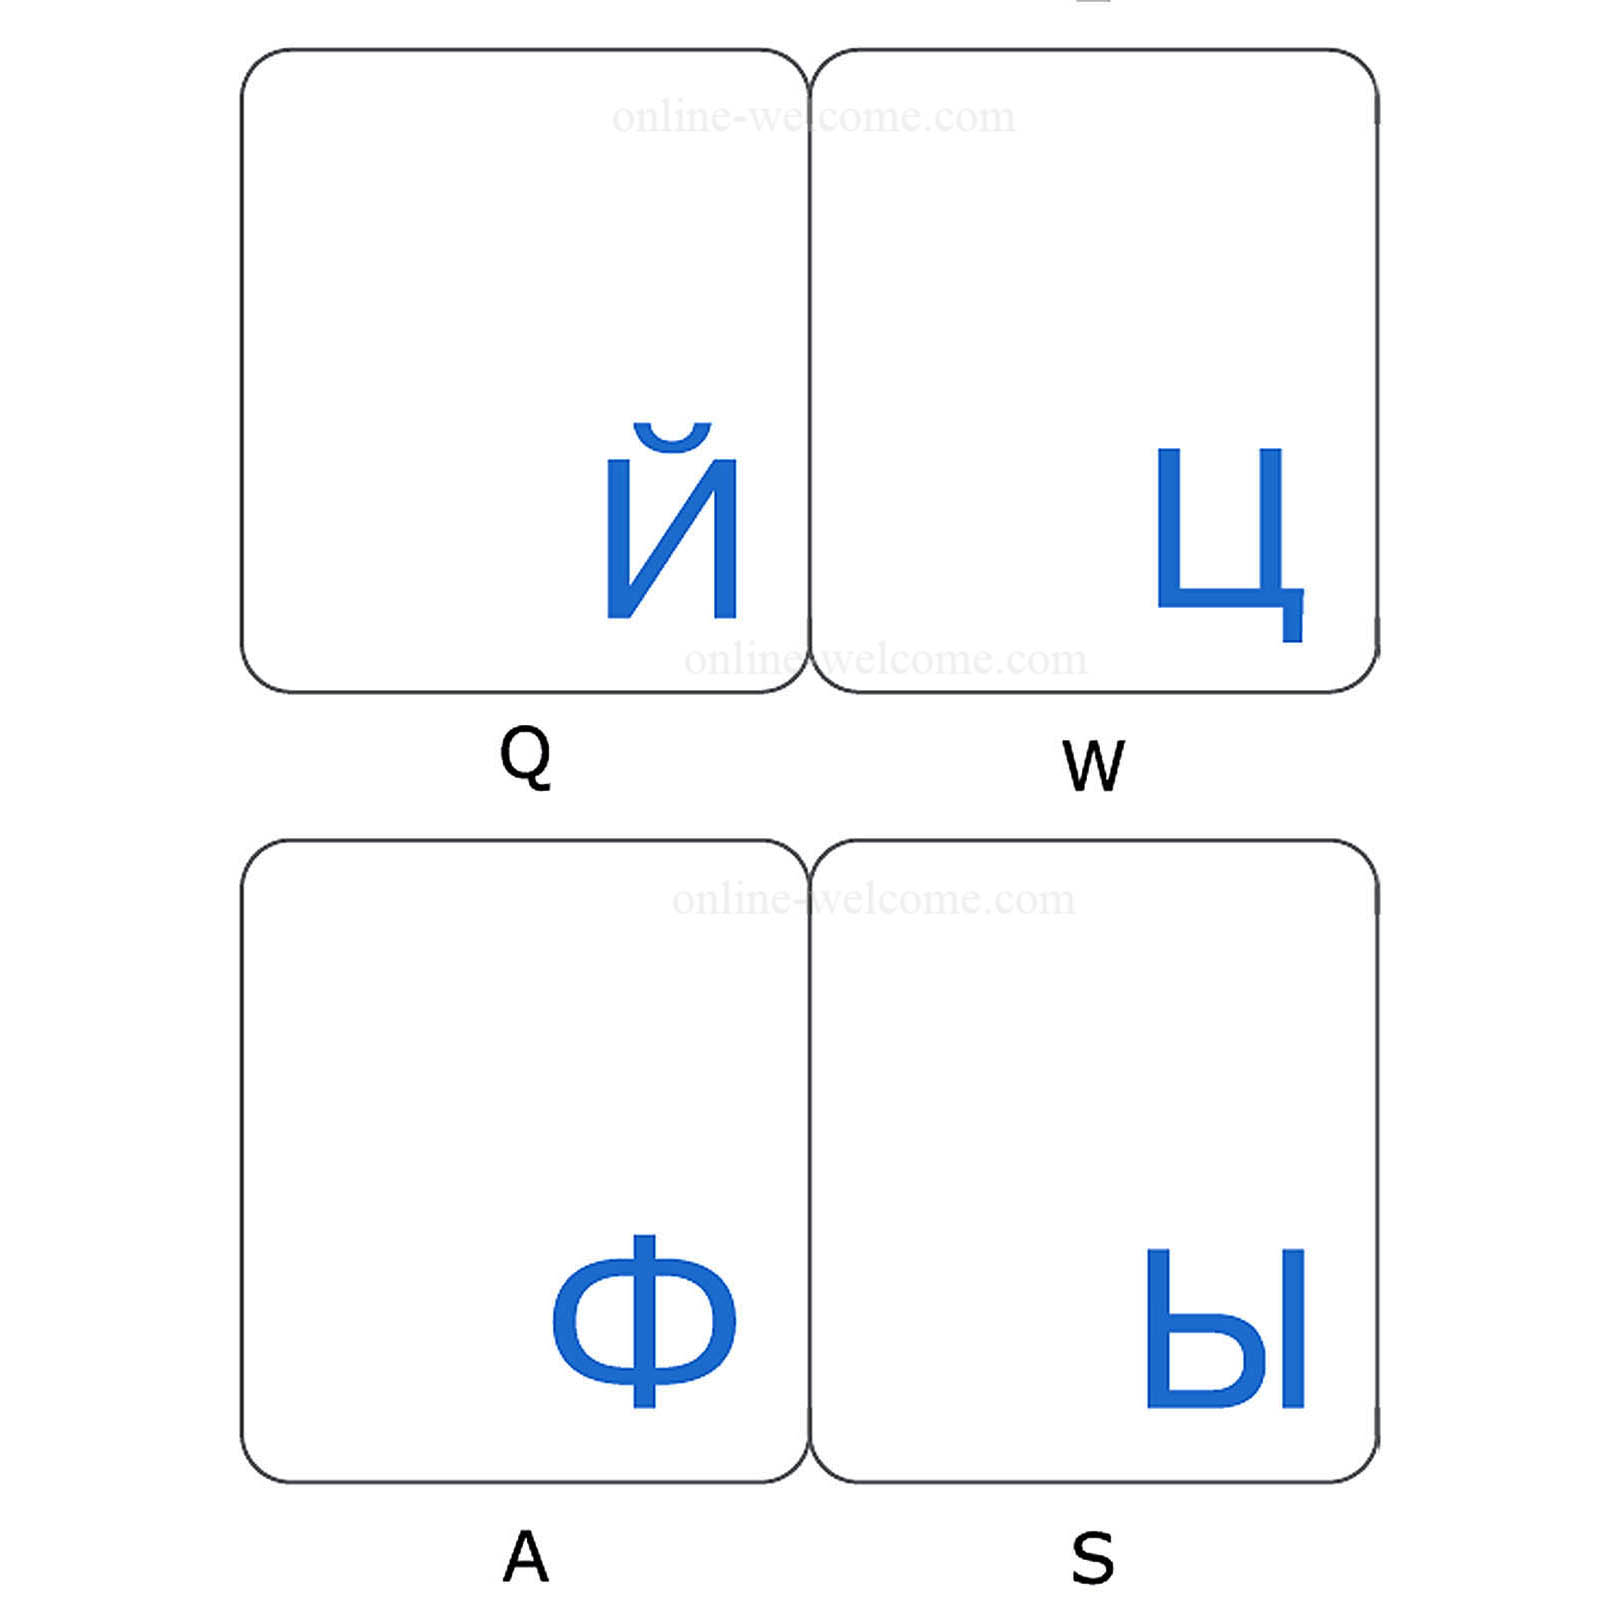 Russian keyboard stickers transparent blue letters